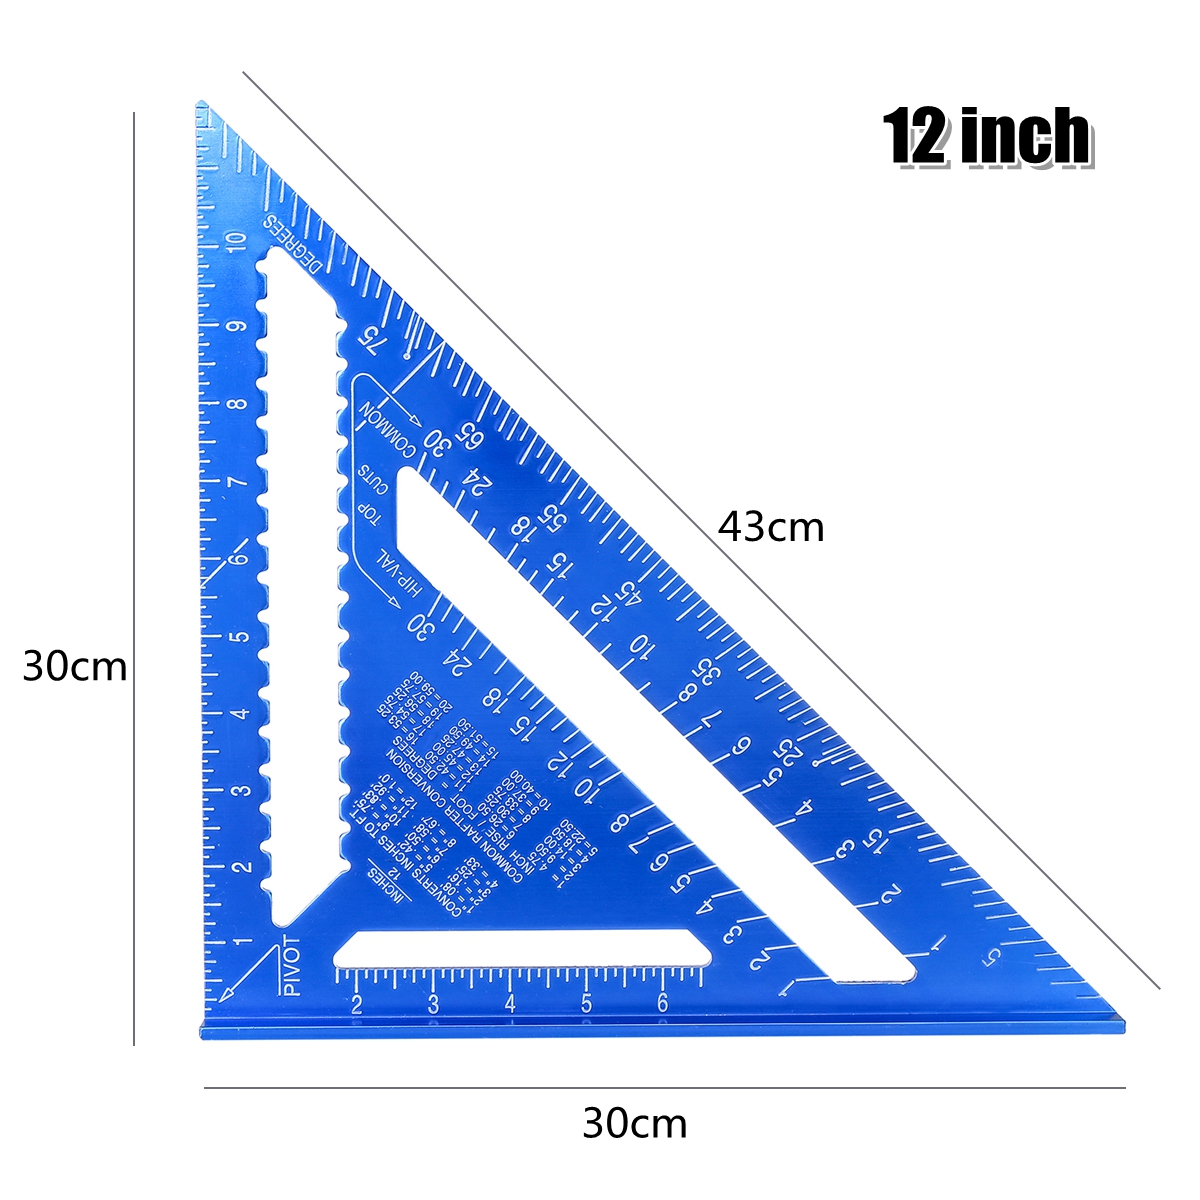 712-Aluminum-Alloy-Speed-Quick-Roofing-Rafter-Angle-Triangle-Ruler-Woodwork-Tool-1771385-4